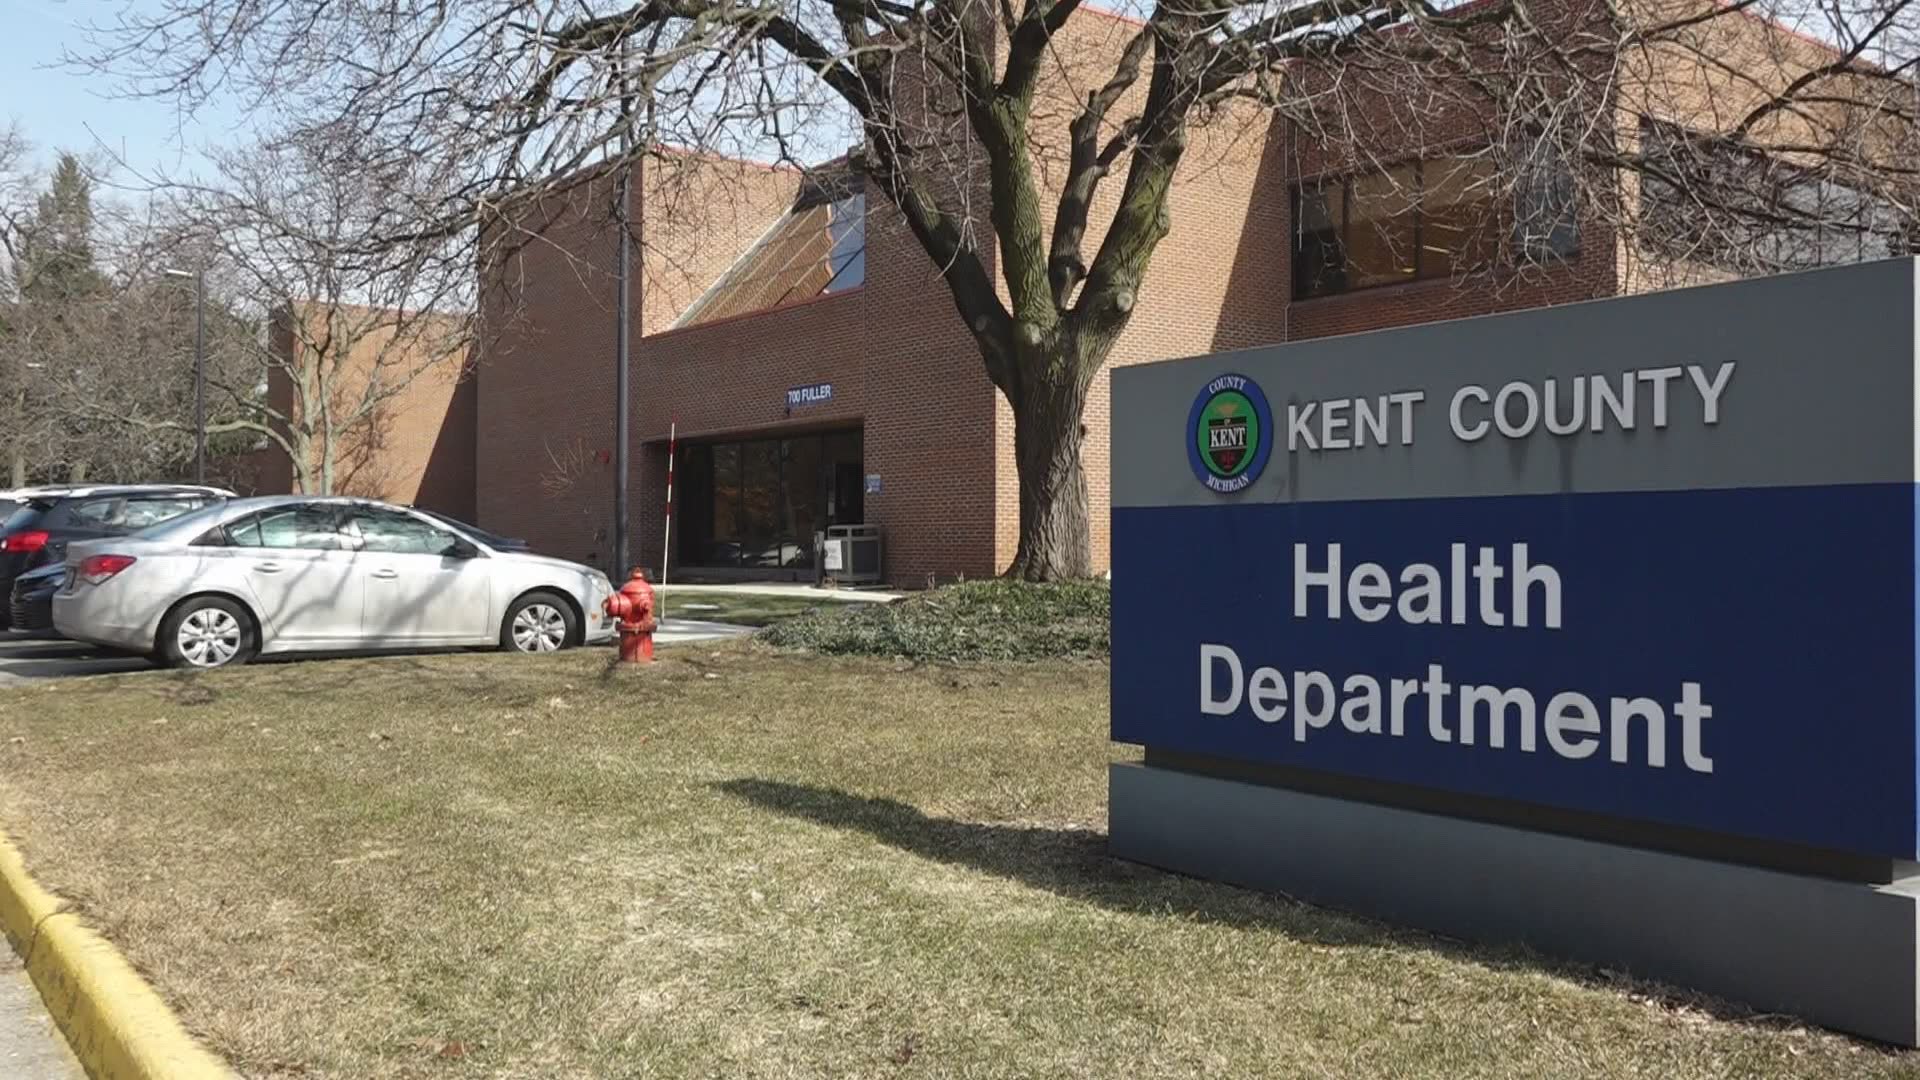 Spring break is either underway, or coming up for many school districts. Health departments are bracing for a bigger impact on the current rise in cases.